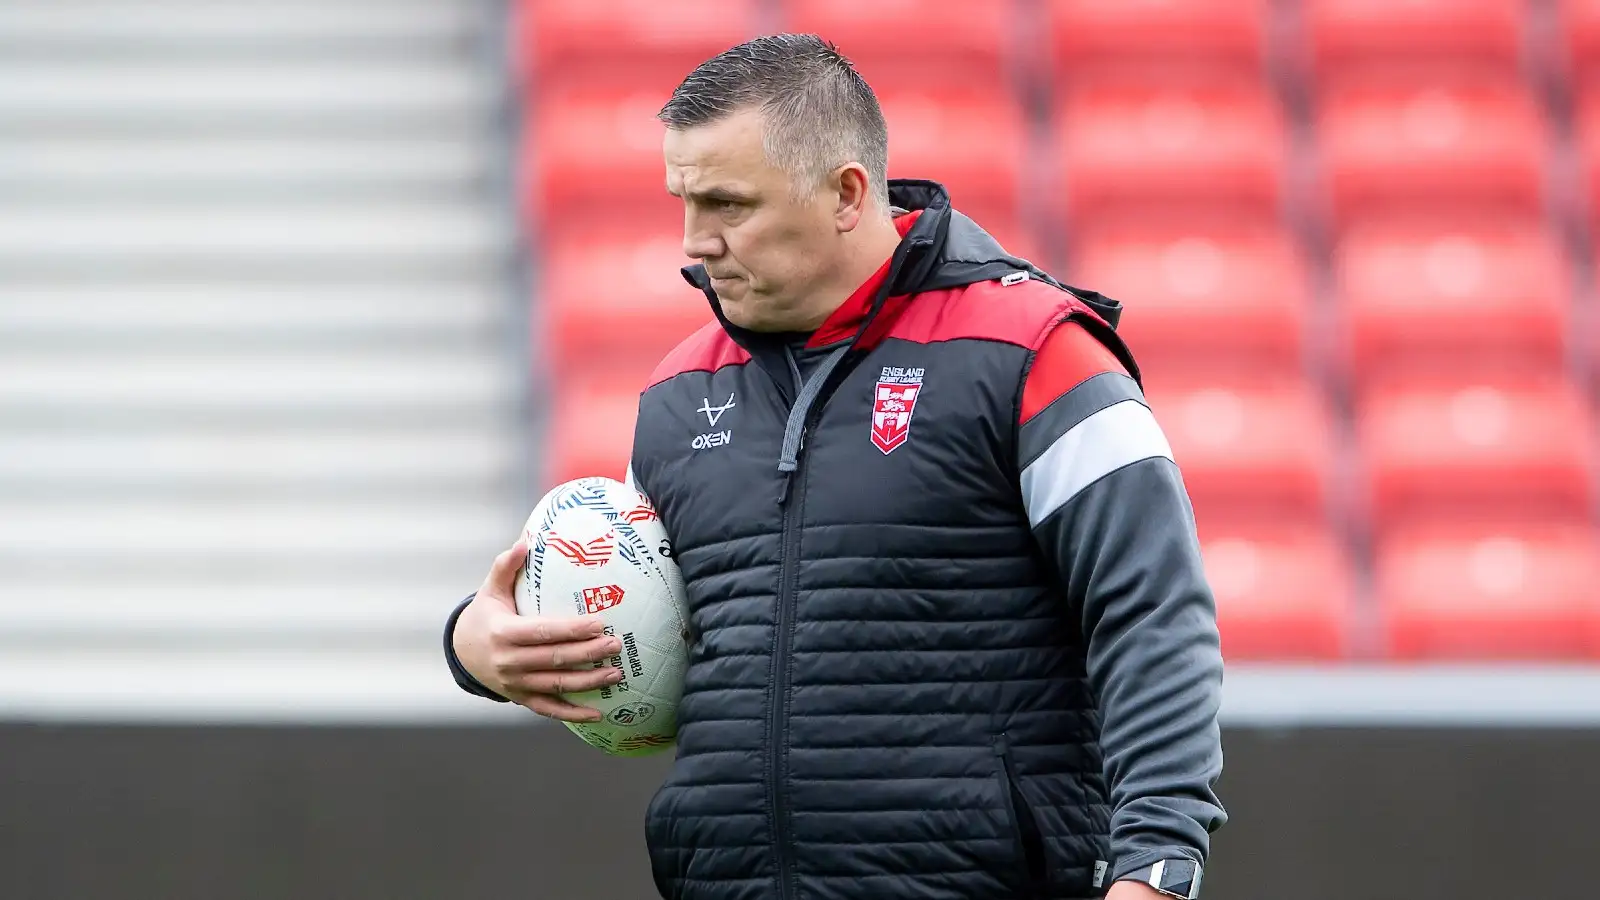 England coach gives backing as Andy Last set for Castleford job